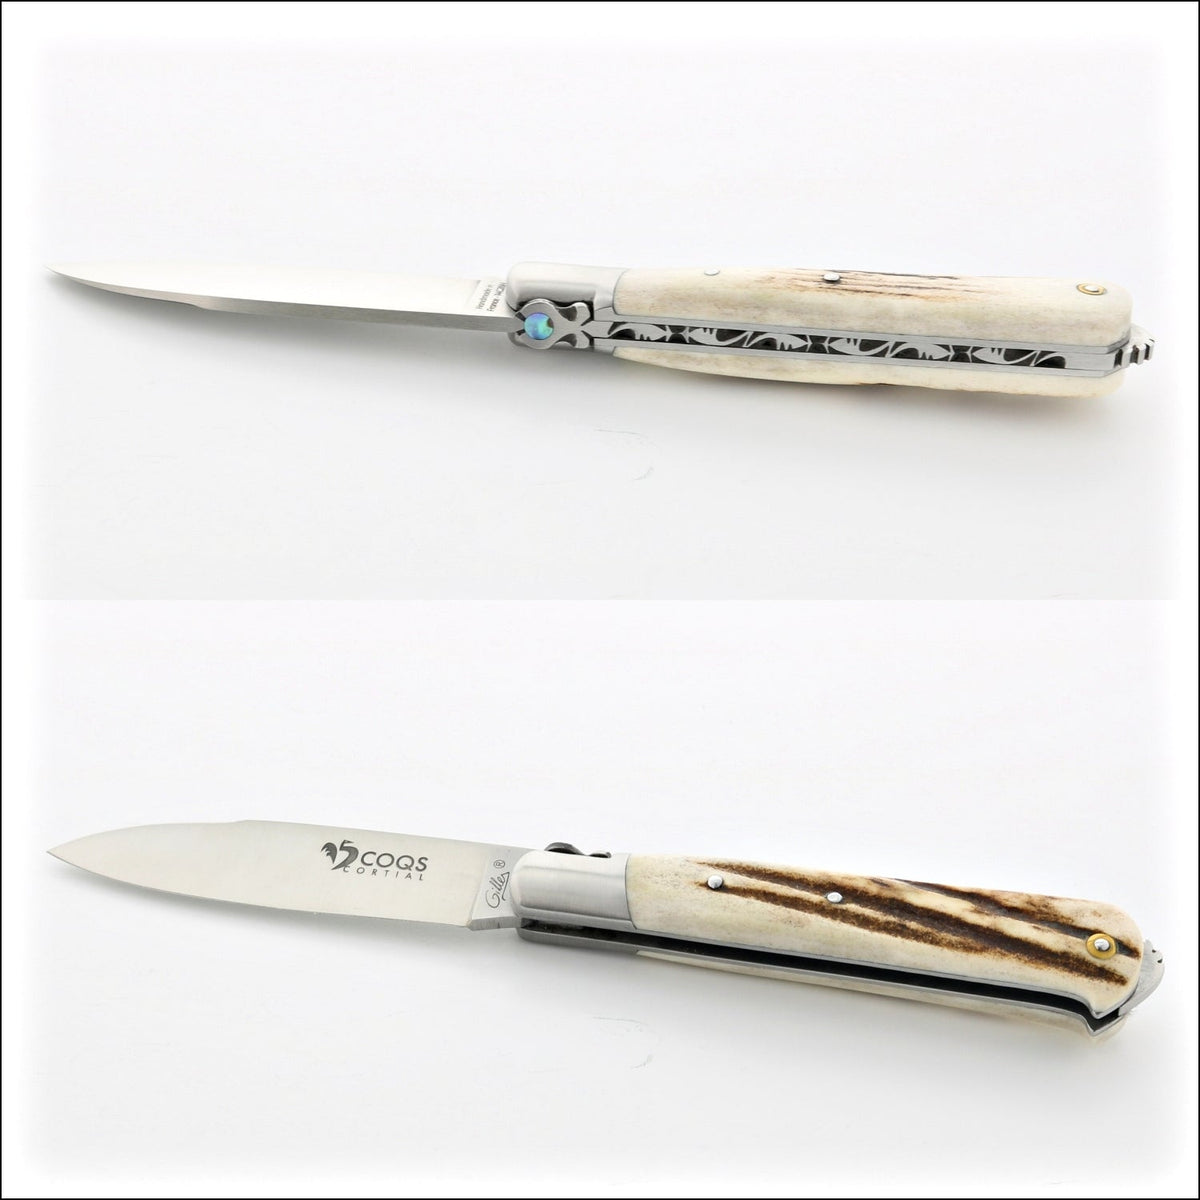 5 Coqs Pocket Knife - Deer Stag &amp; Mother of Pearl Inlay